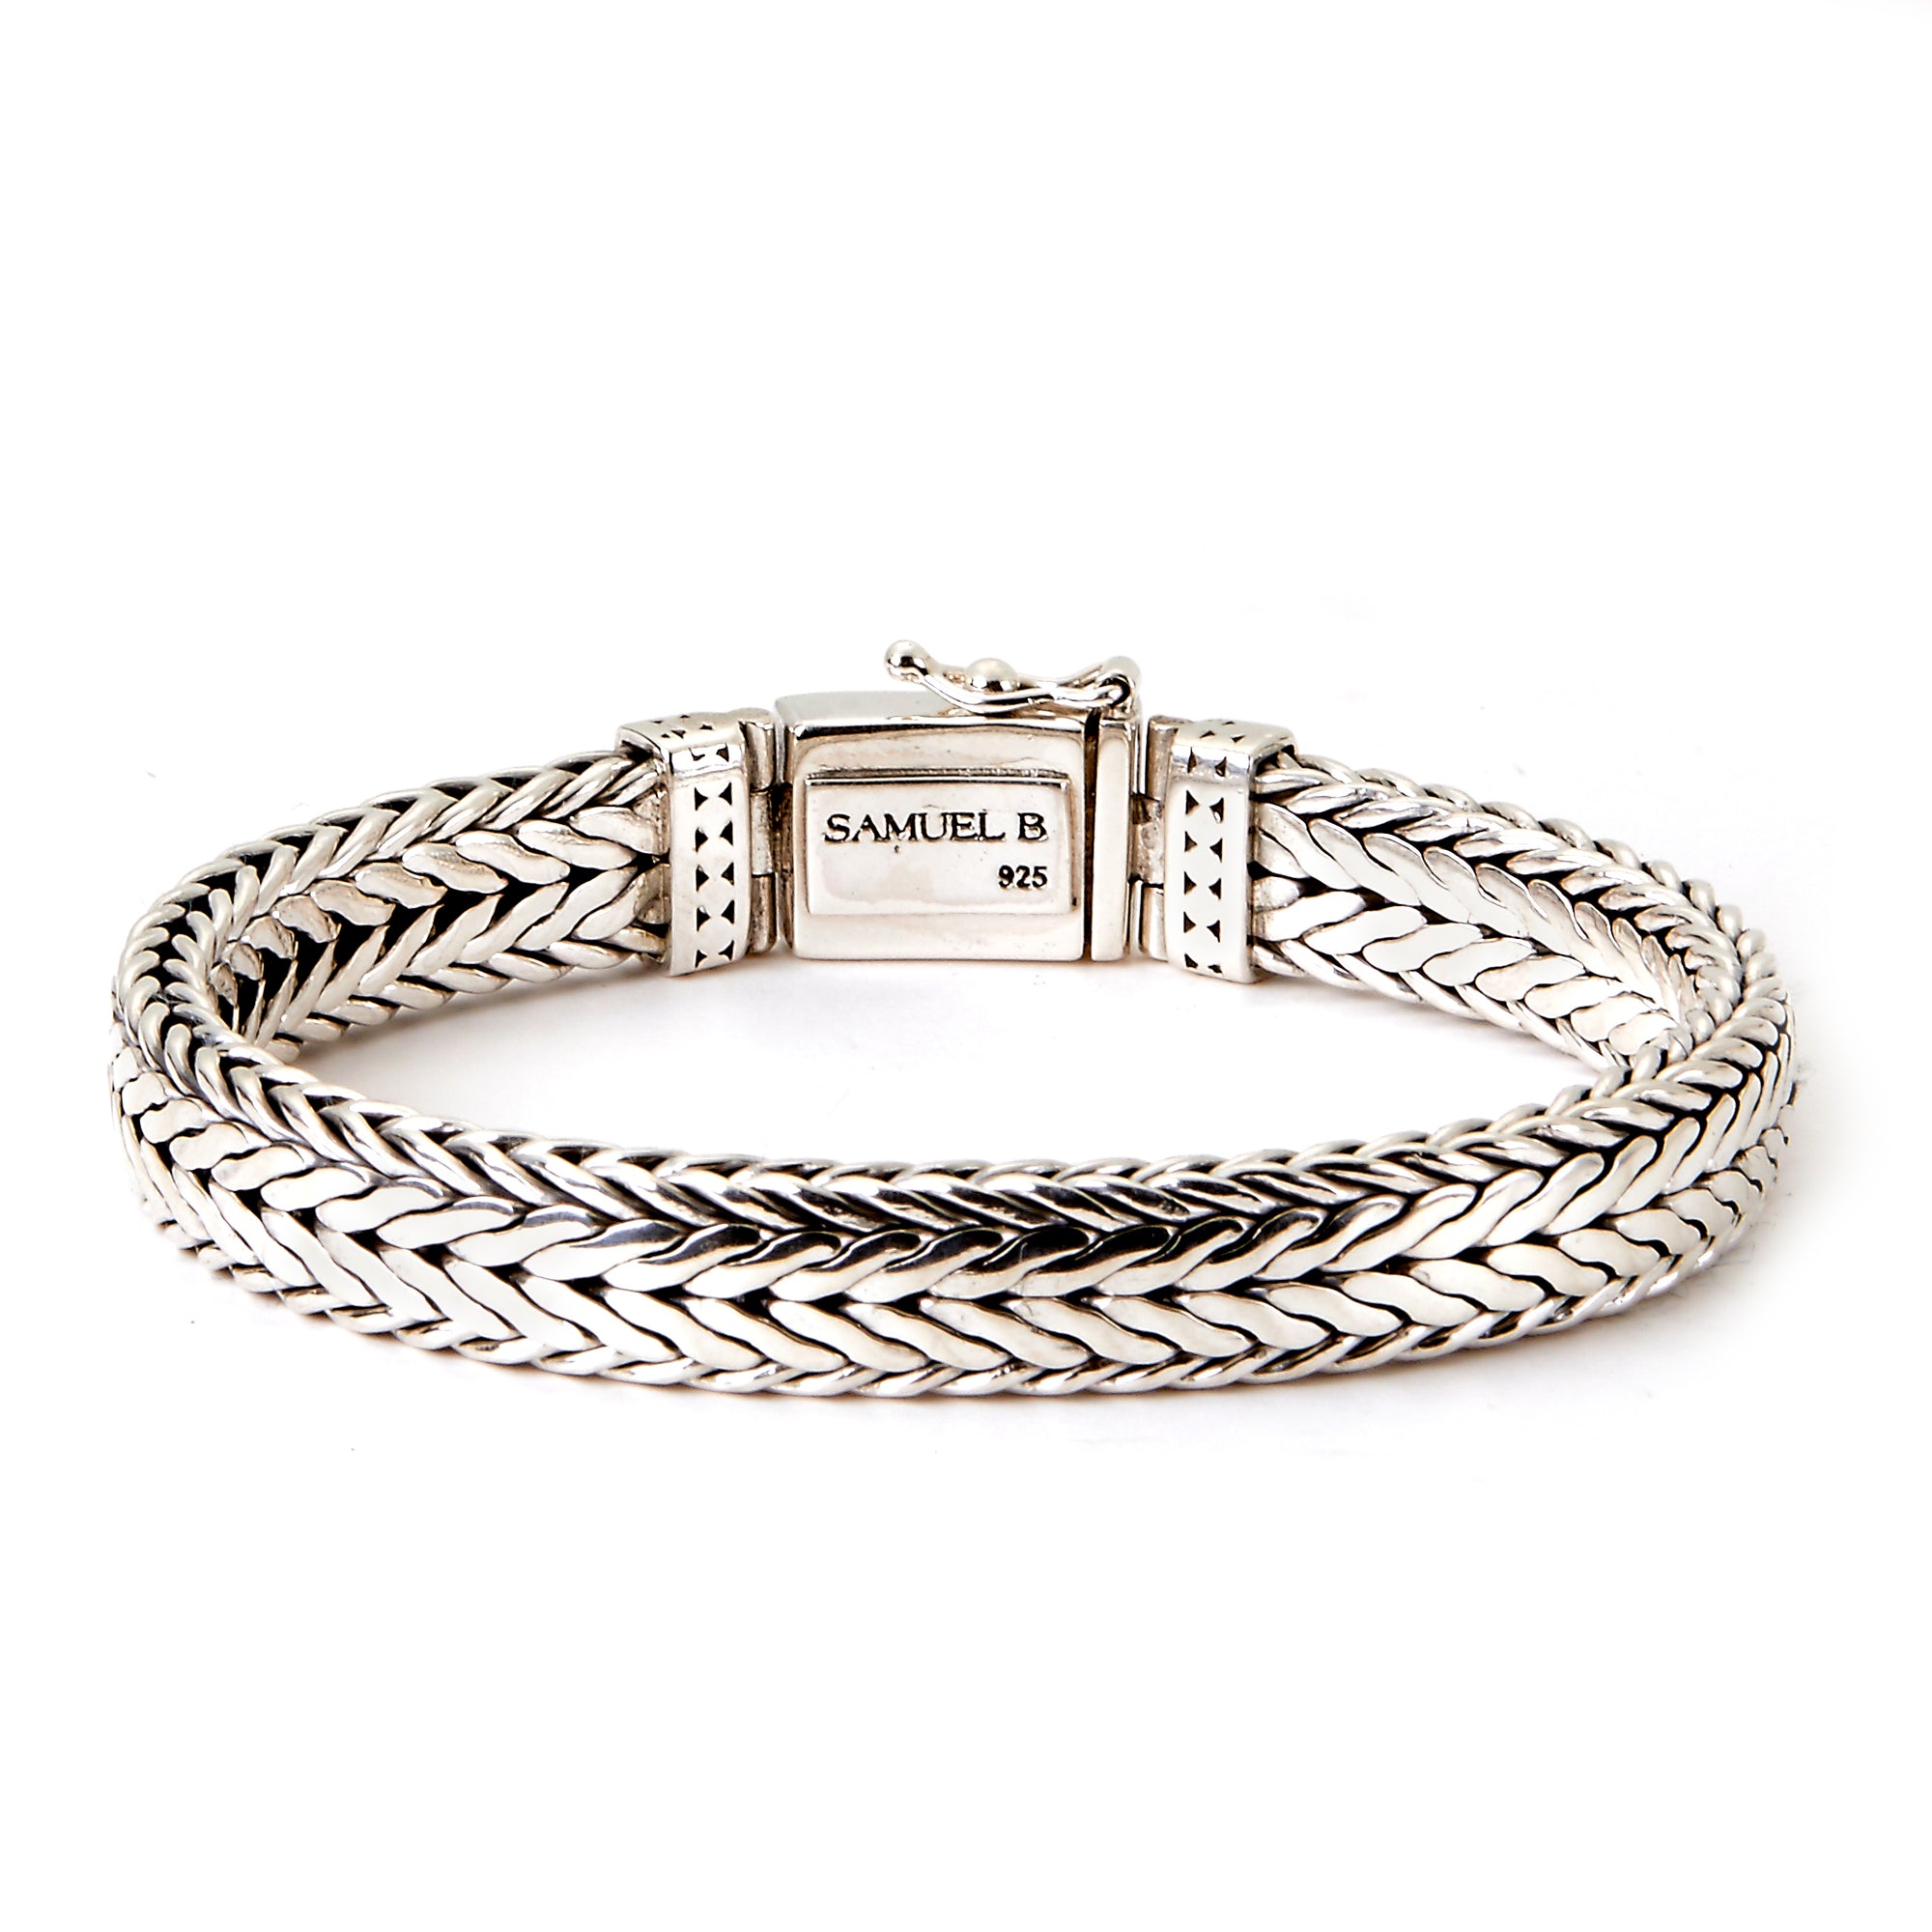 Tapiz Men’s Bracelet available at Talisman Collection Fine Jewelers in El Dorado Hills, CA and online. Specs: Tapiz Men’s Bracelet crafted in Sterling Silver features a woven design. 8.5". 